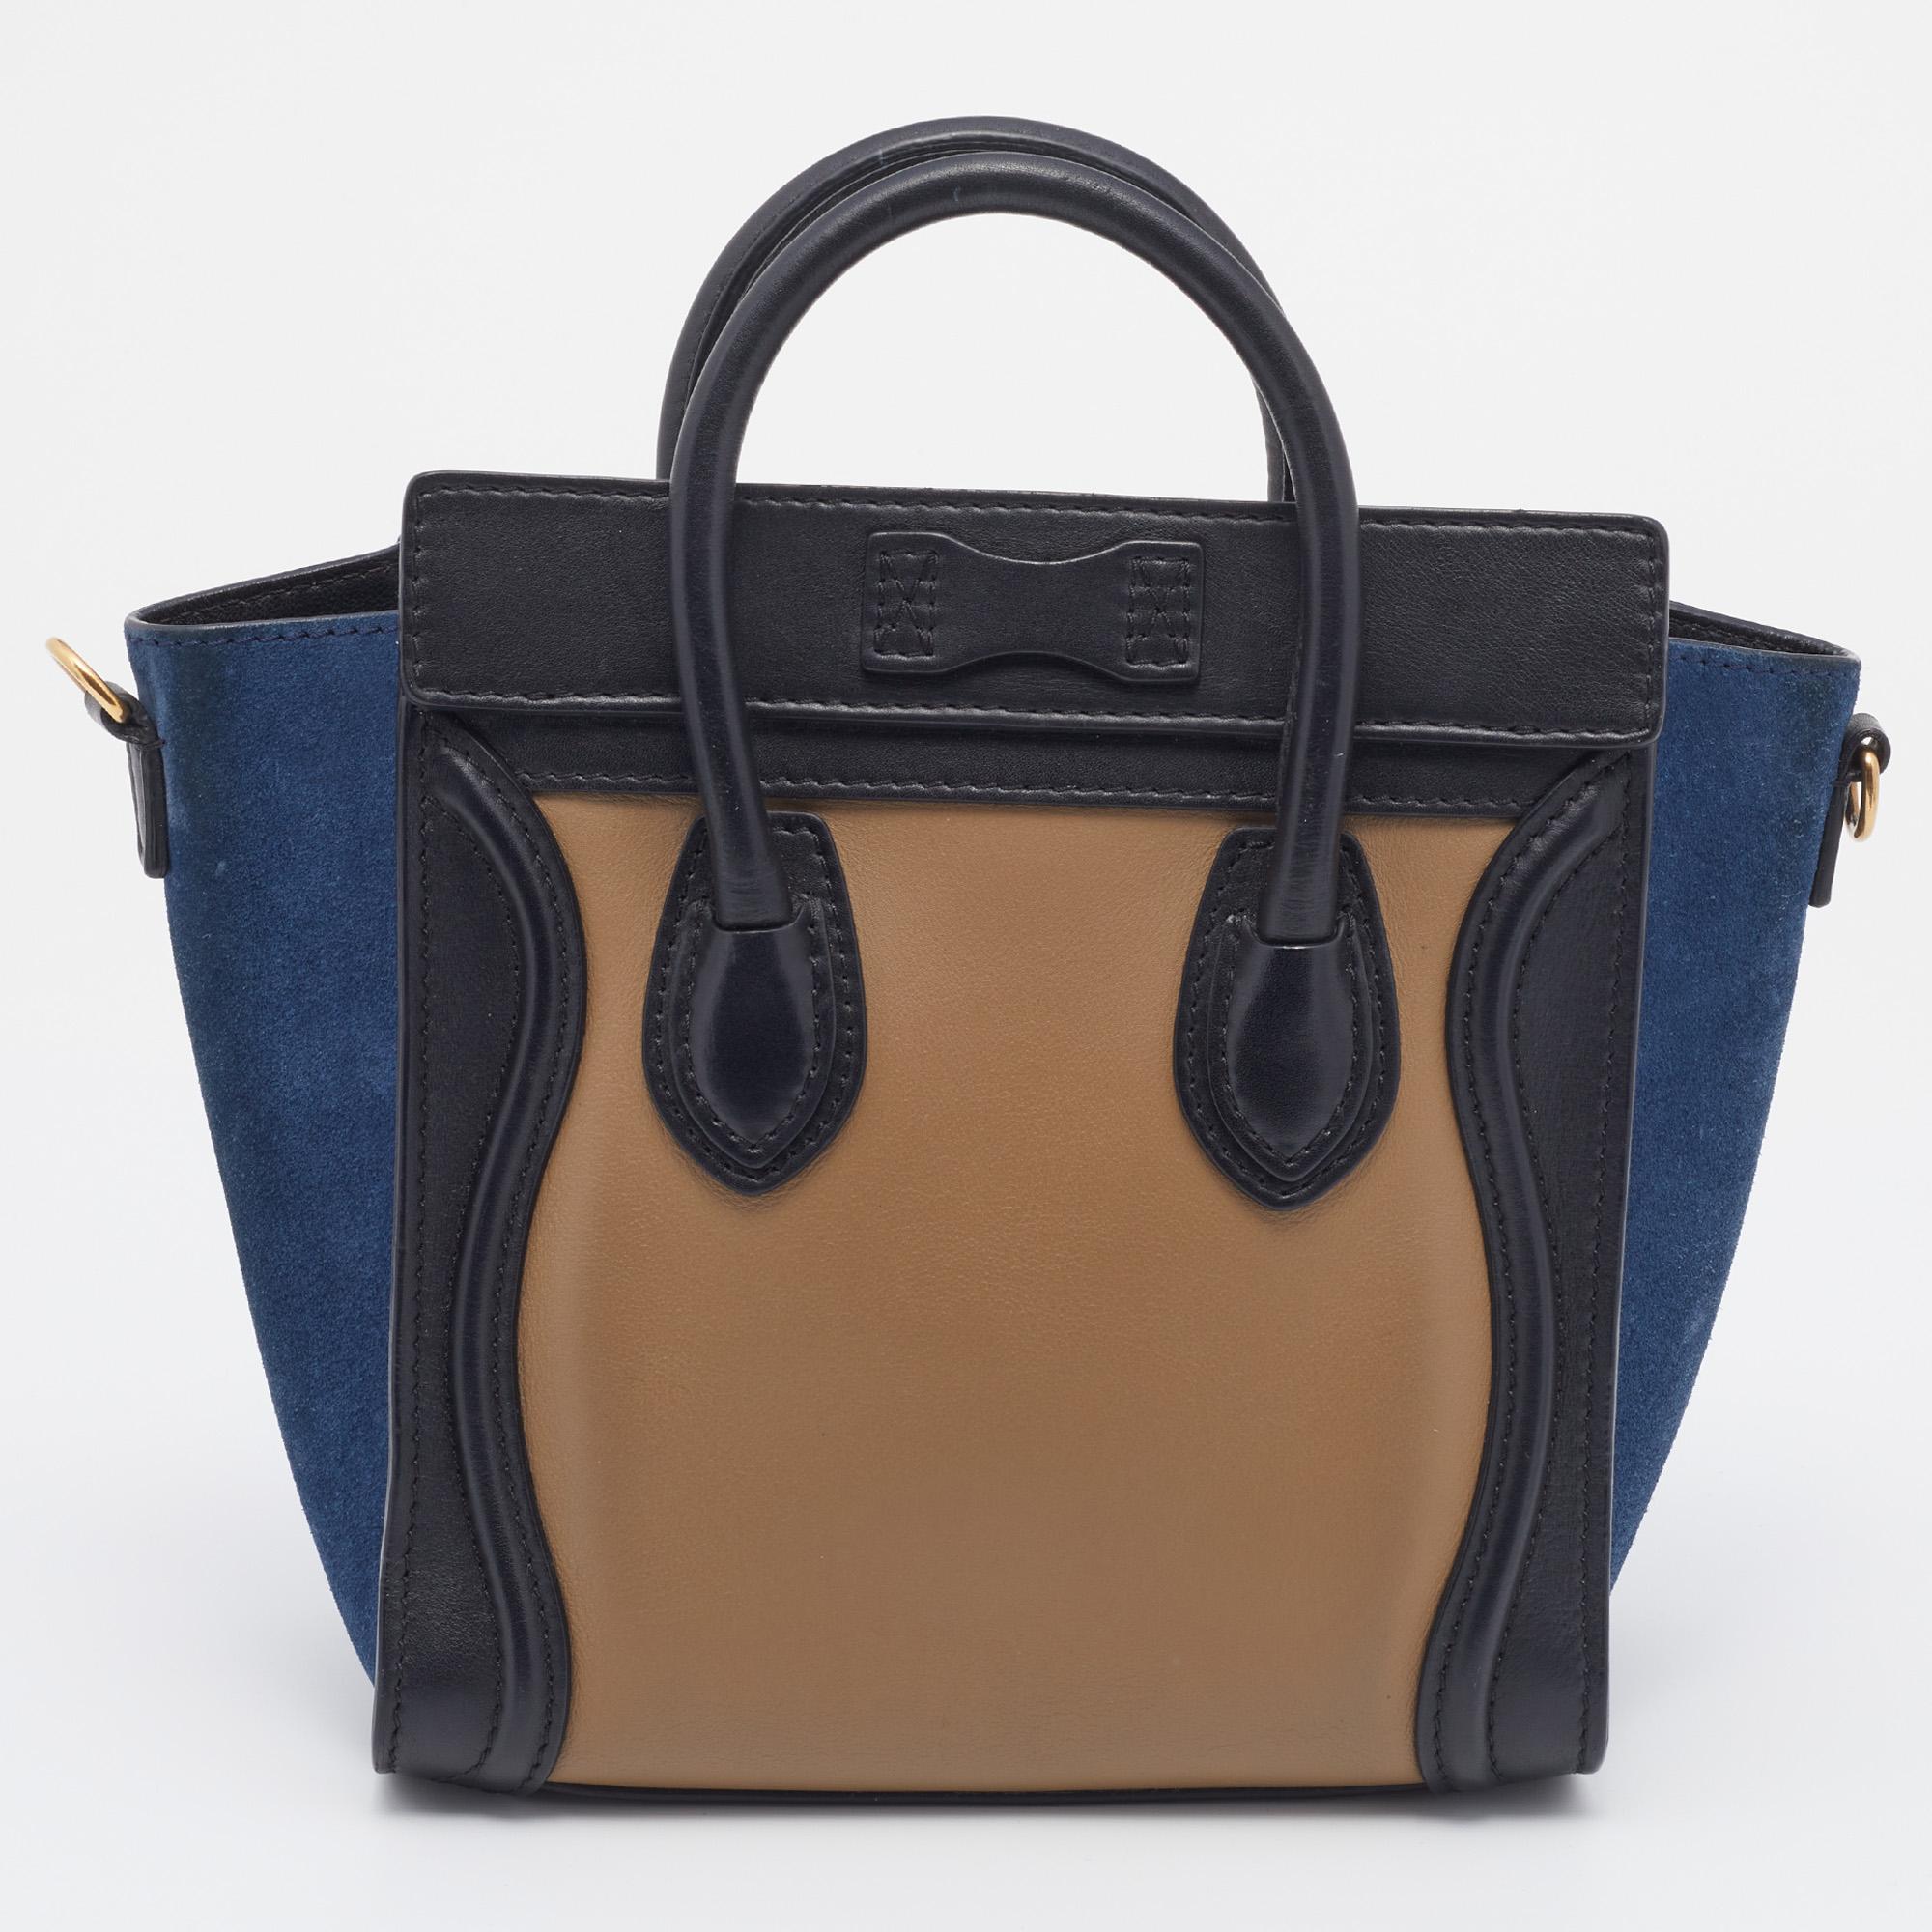 The Nano Luggage tote is from one of the most loved collections from the House of Céline. This tote serves not just as a luxurious style element but also acts as a luxe alternative to carry all your belongings. Its exterior displays tricolor leather